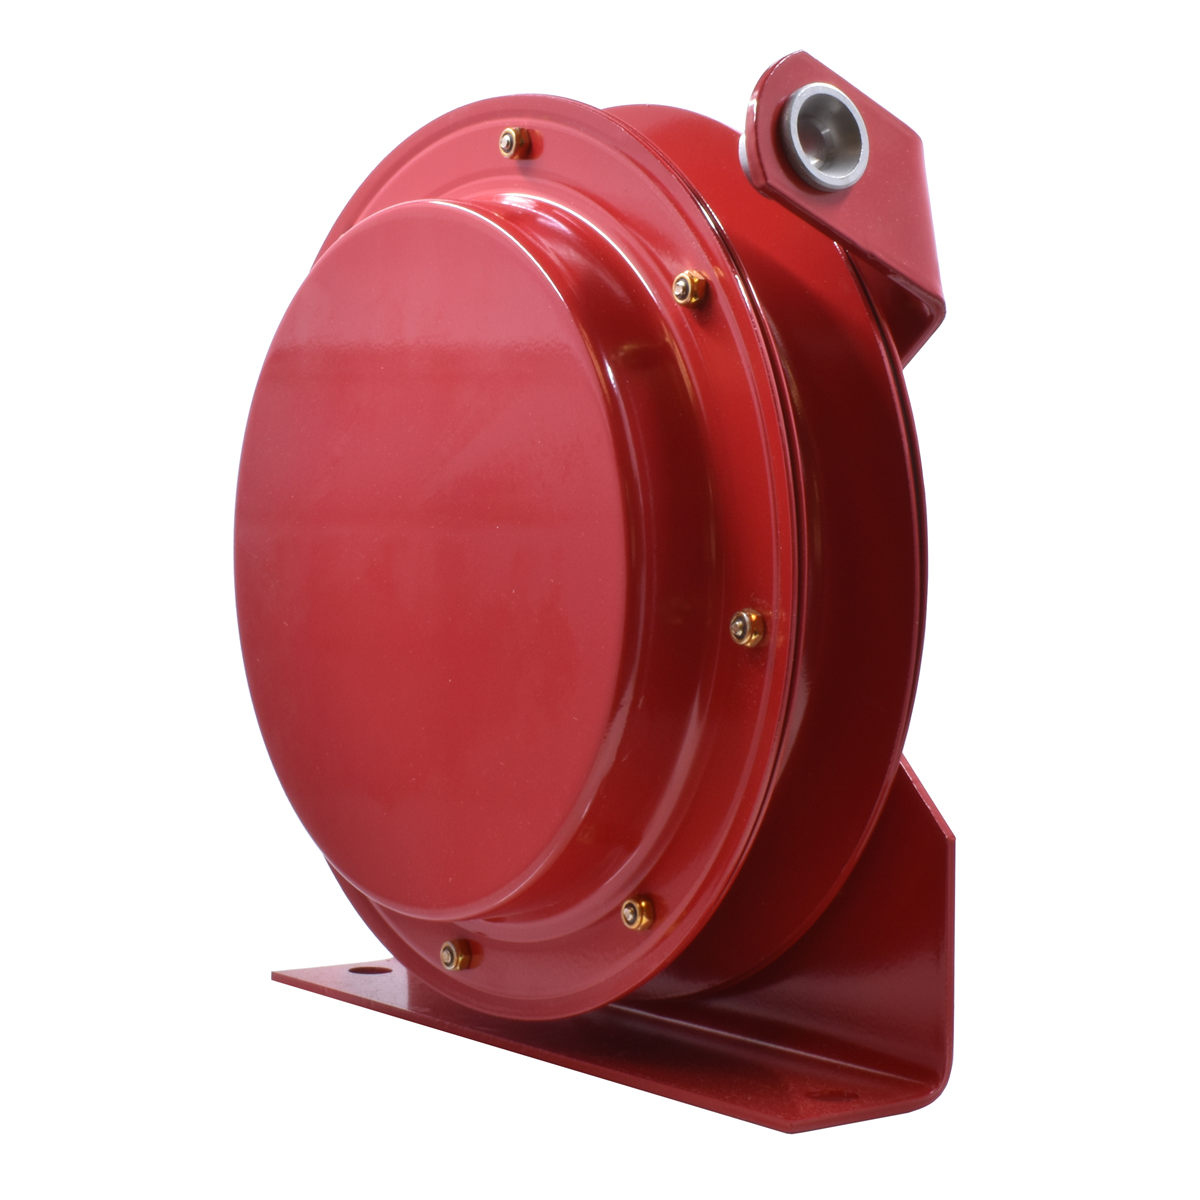 GAMMAGNET Versatile Magnetic Case for use with Gammon Reel Plumb